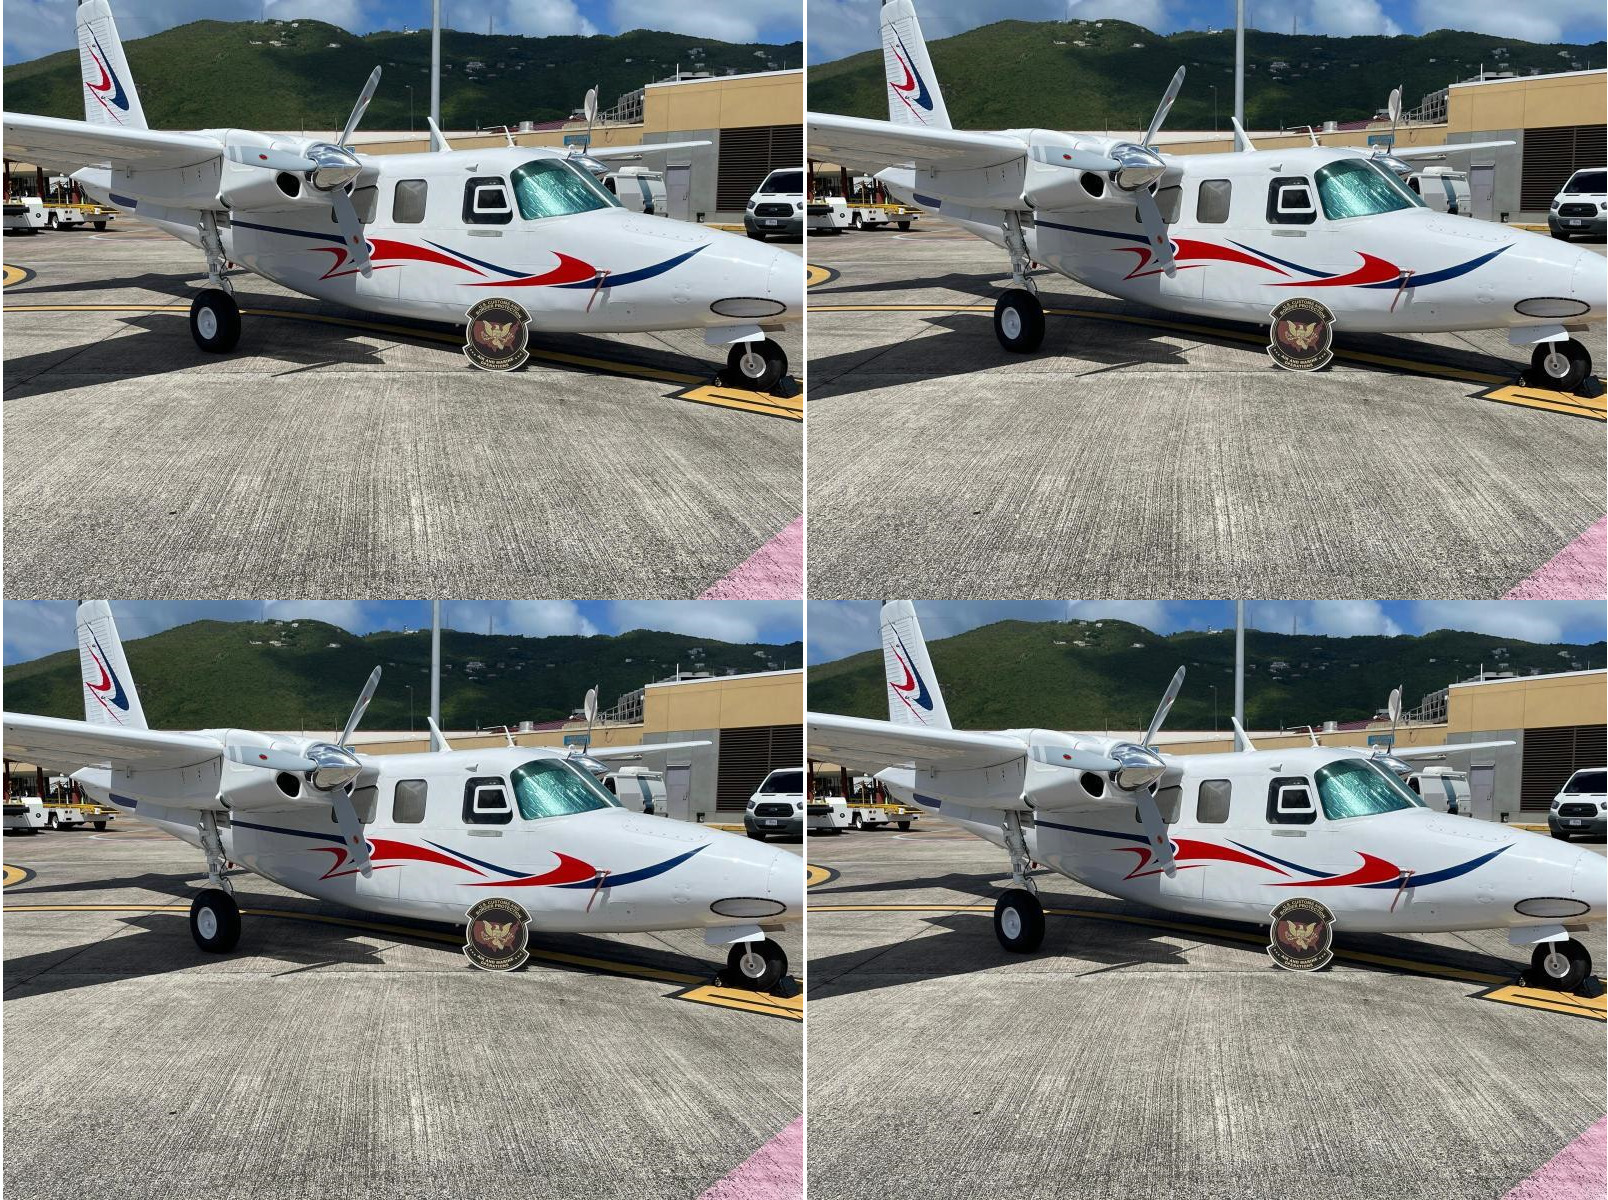 CBP, DEA Agents Seize St. Thomas Aircraft Tied To Smuggling Activities